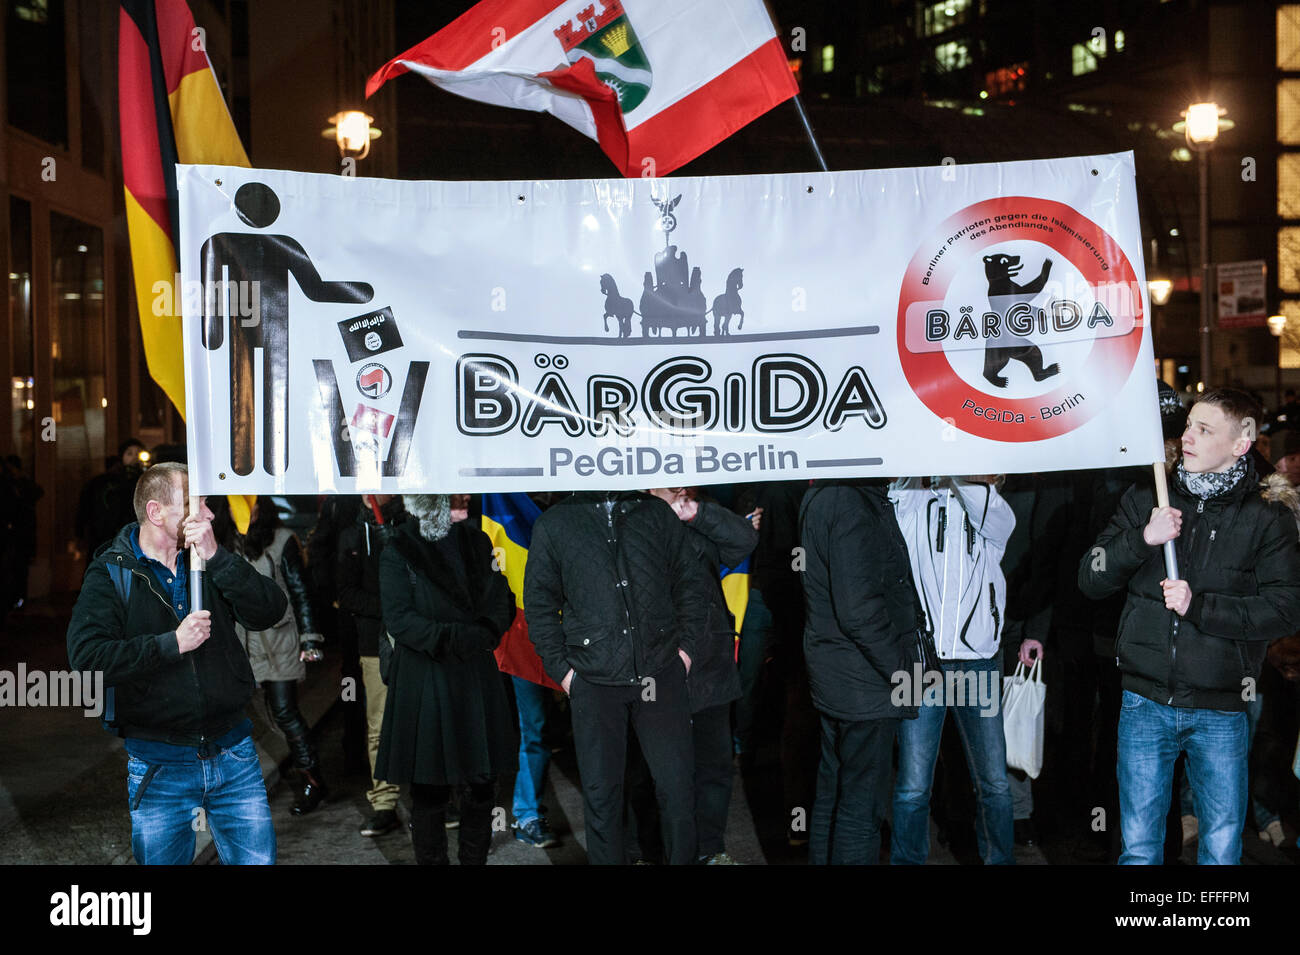 Berlin, Germany. 2nd Feb, 2015. Members of the anti-Islamic group Baergida (Berlin Patriots against the Islamization of the west) carry a banner which reads 'Baergida - Pegida Berlin' during a rally in Berlin, Germany, 2 February 2015. The Baergida group is an offshoot of the Pegida group (Patriotic Europeans against the Islamization of the West). Photo: Paul Zinken/dpa/Alamy Live News Stock Photo